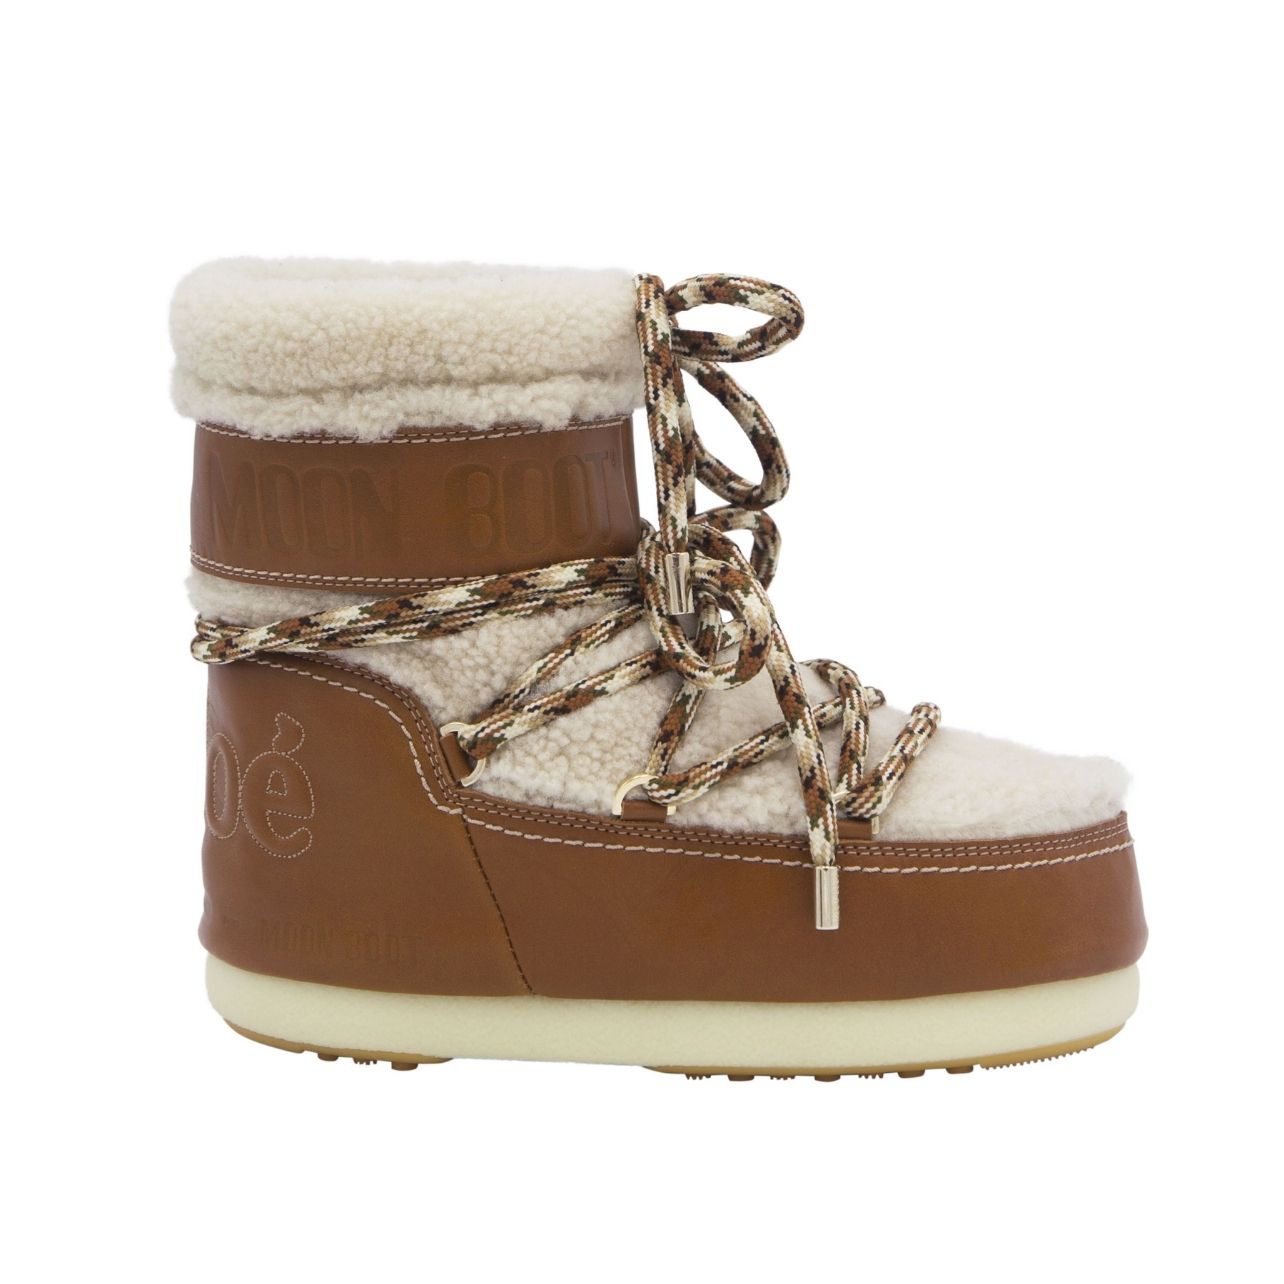 Chloe Moon Boots with brown leather and shearling detailing